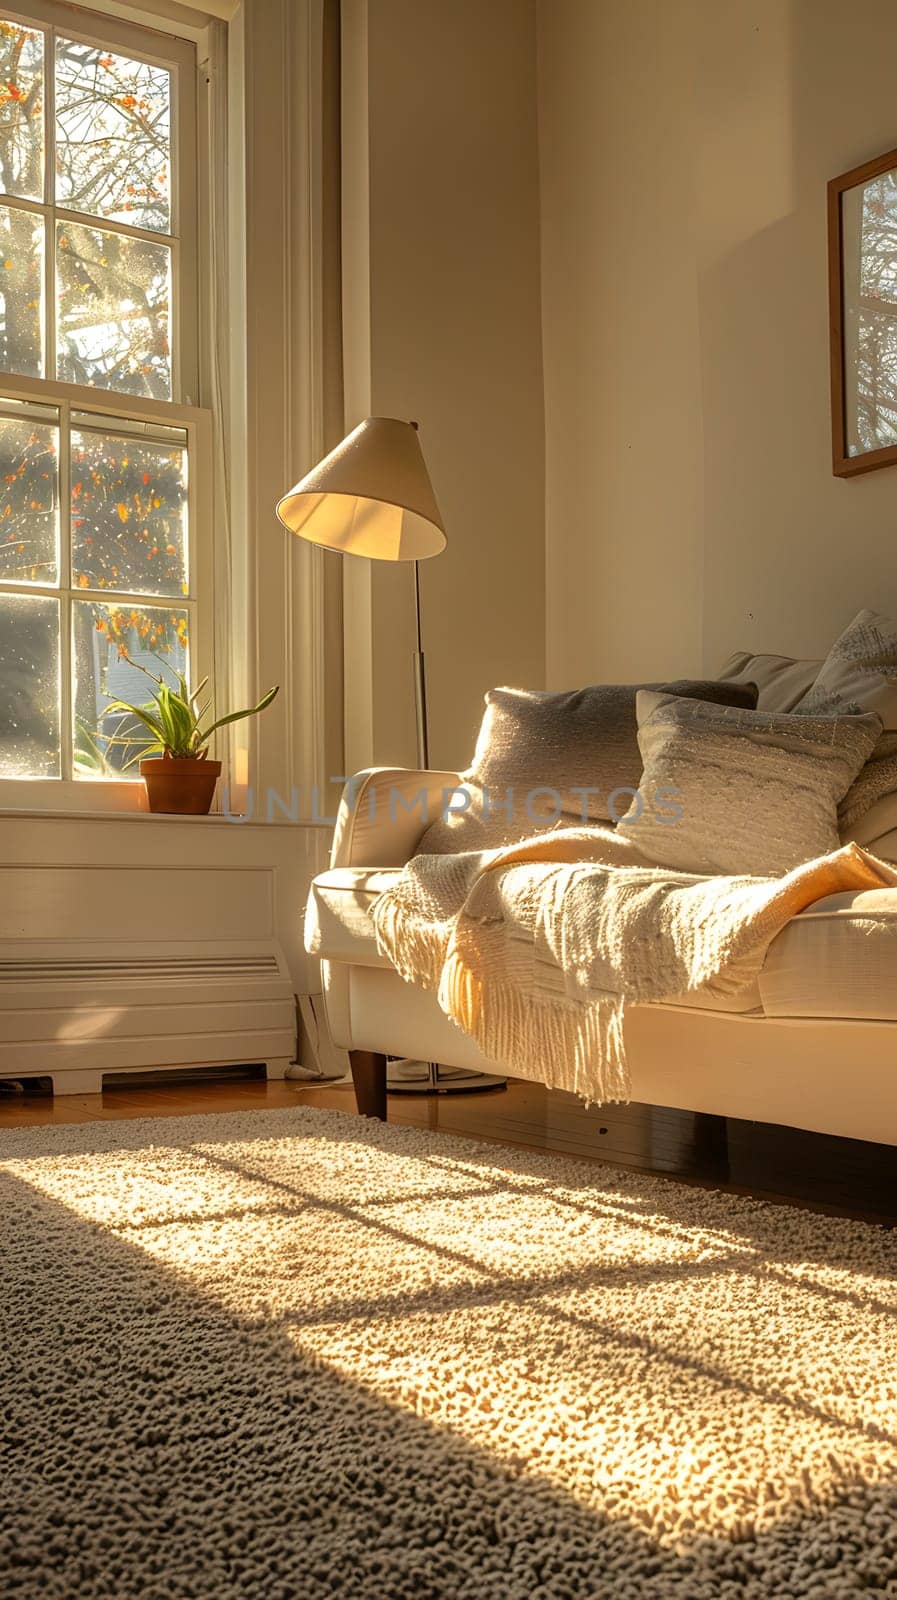 The sun is streaming through the window of a cozy living room adorned with furniture, including a couch and a lamp, creating a warm and inviting atmosphere